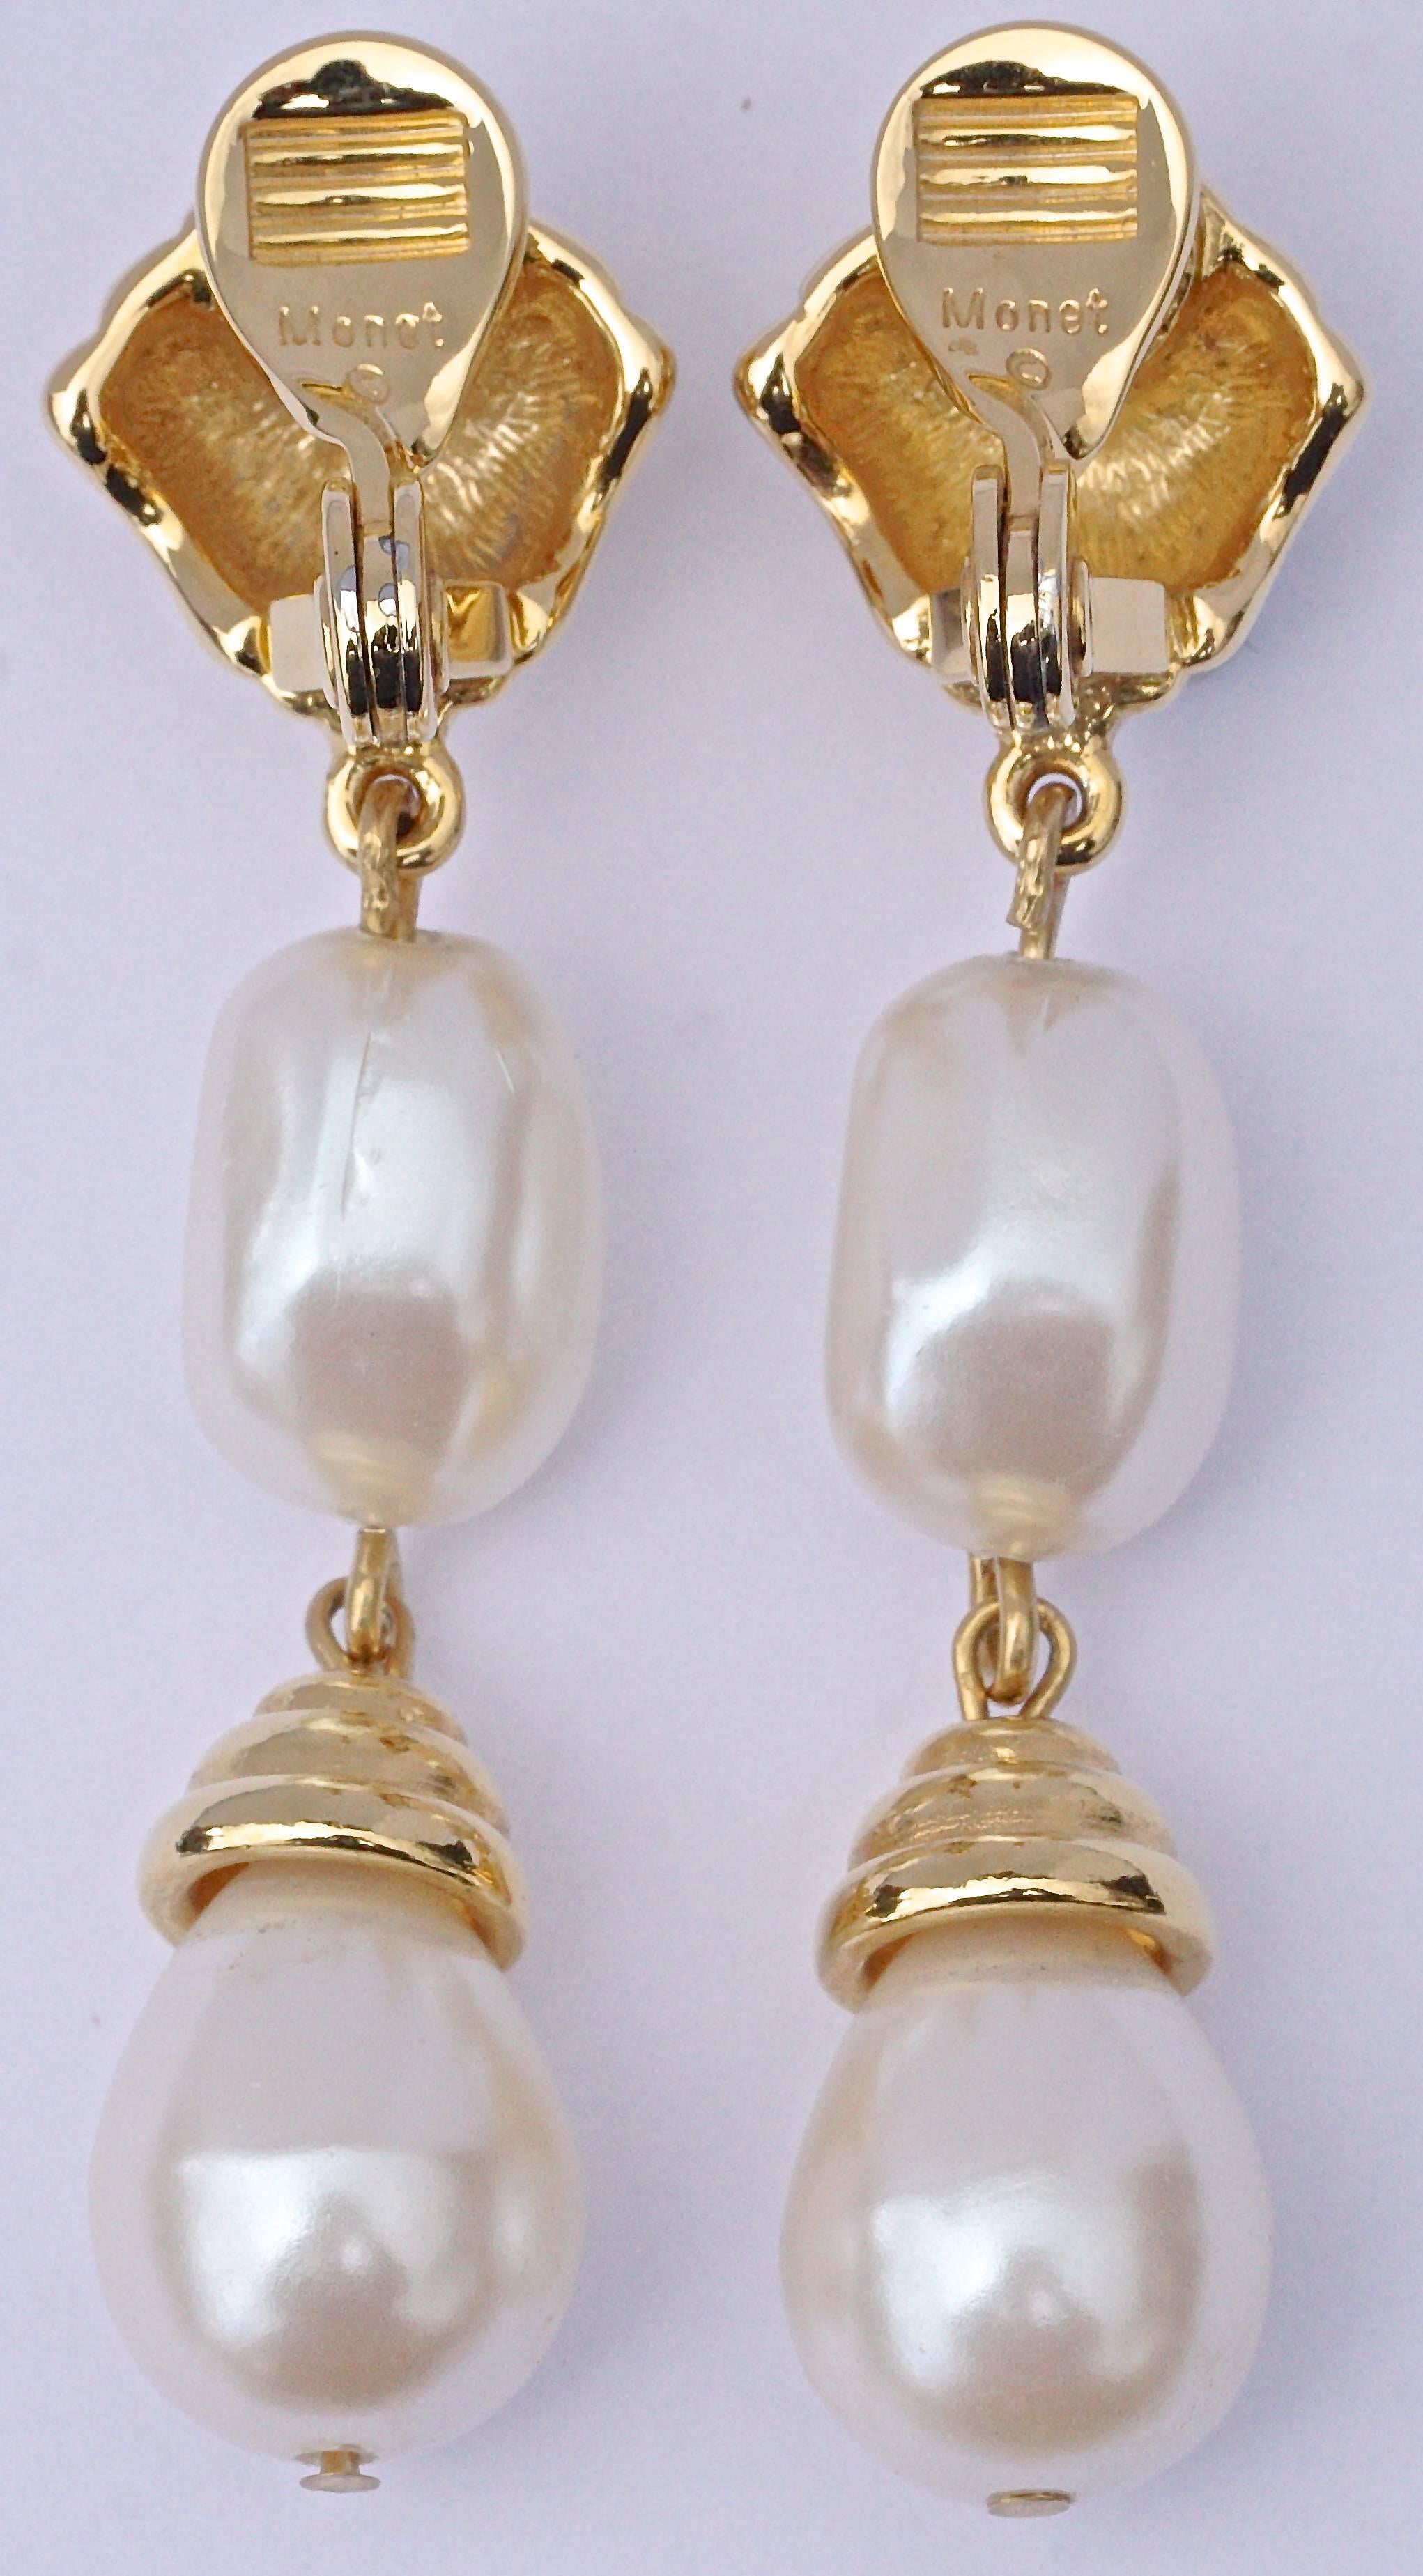 Stylish Monet gold tone clip on earrings featuring faux pearl drops. Length 5.7cm, 2.24 inches. These are high quality vintage 1980s Monet earrings, in very good condition.

Monet was founded in 1929 by Michael and Jay Chernow in Providence, Rhode